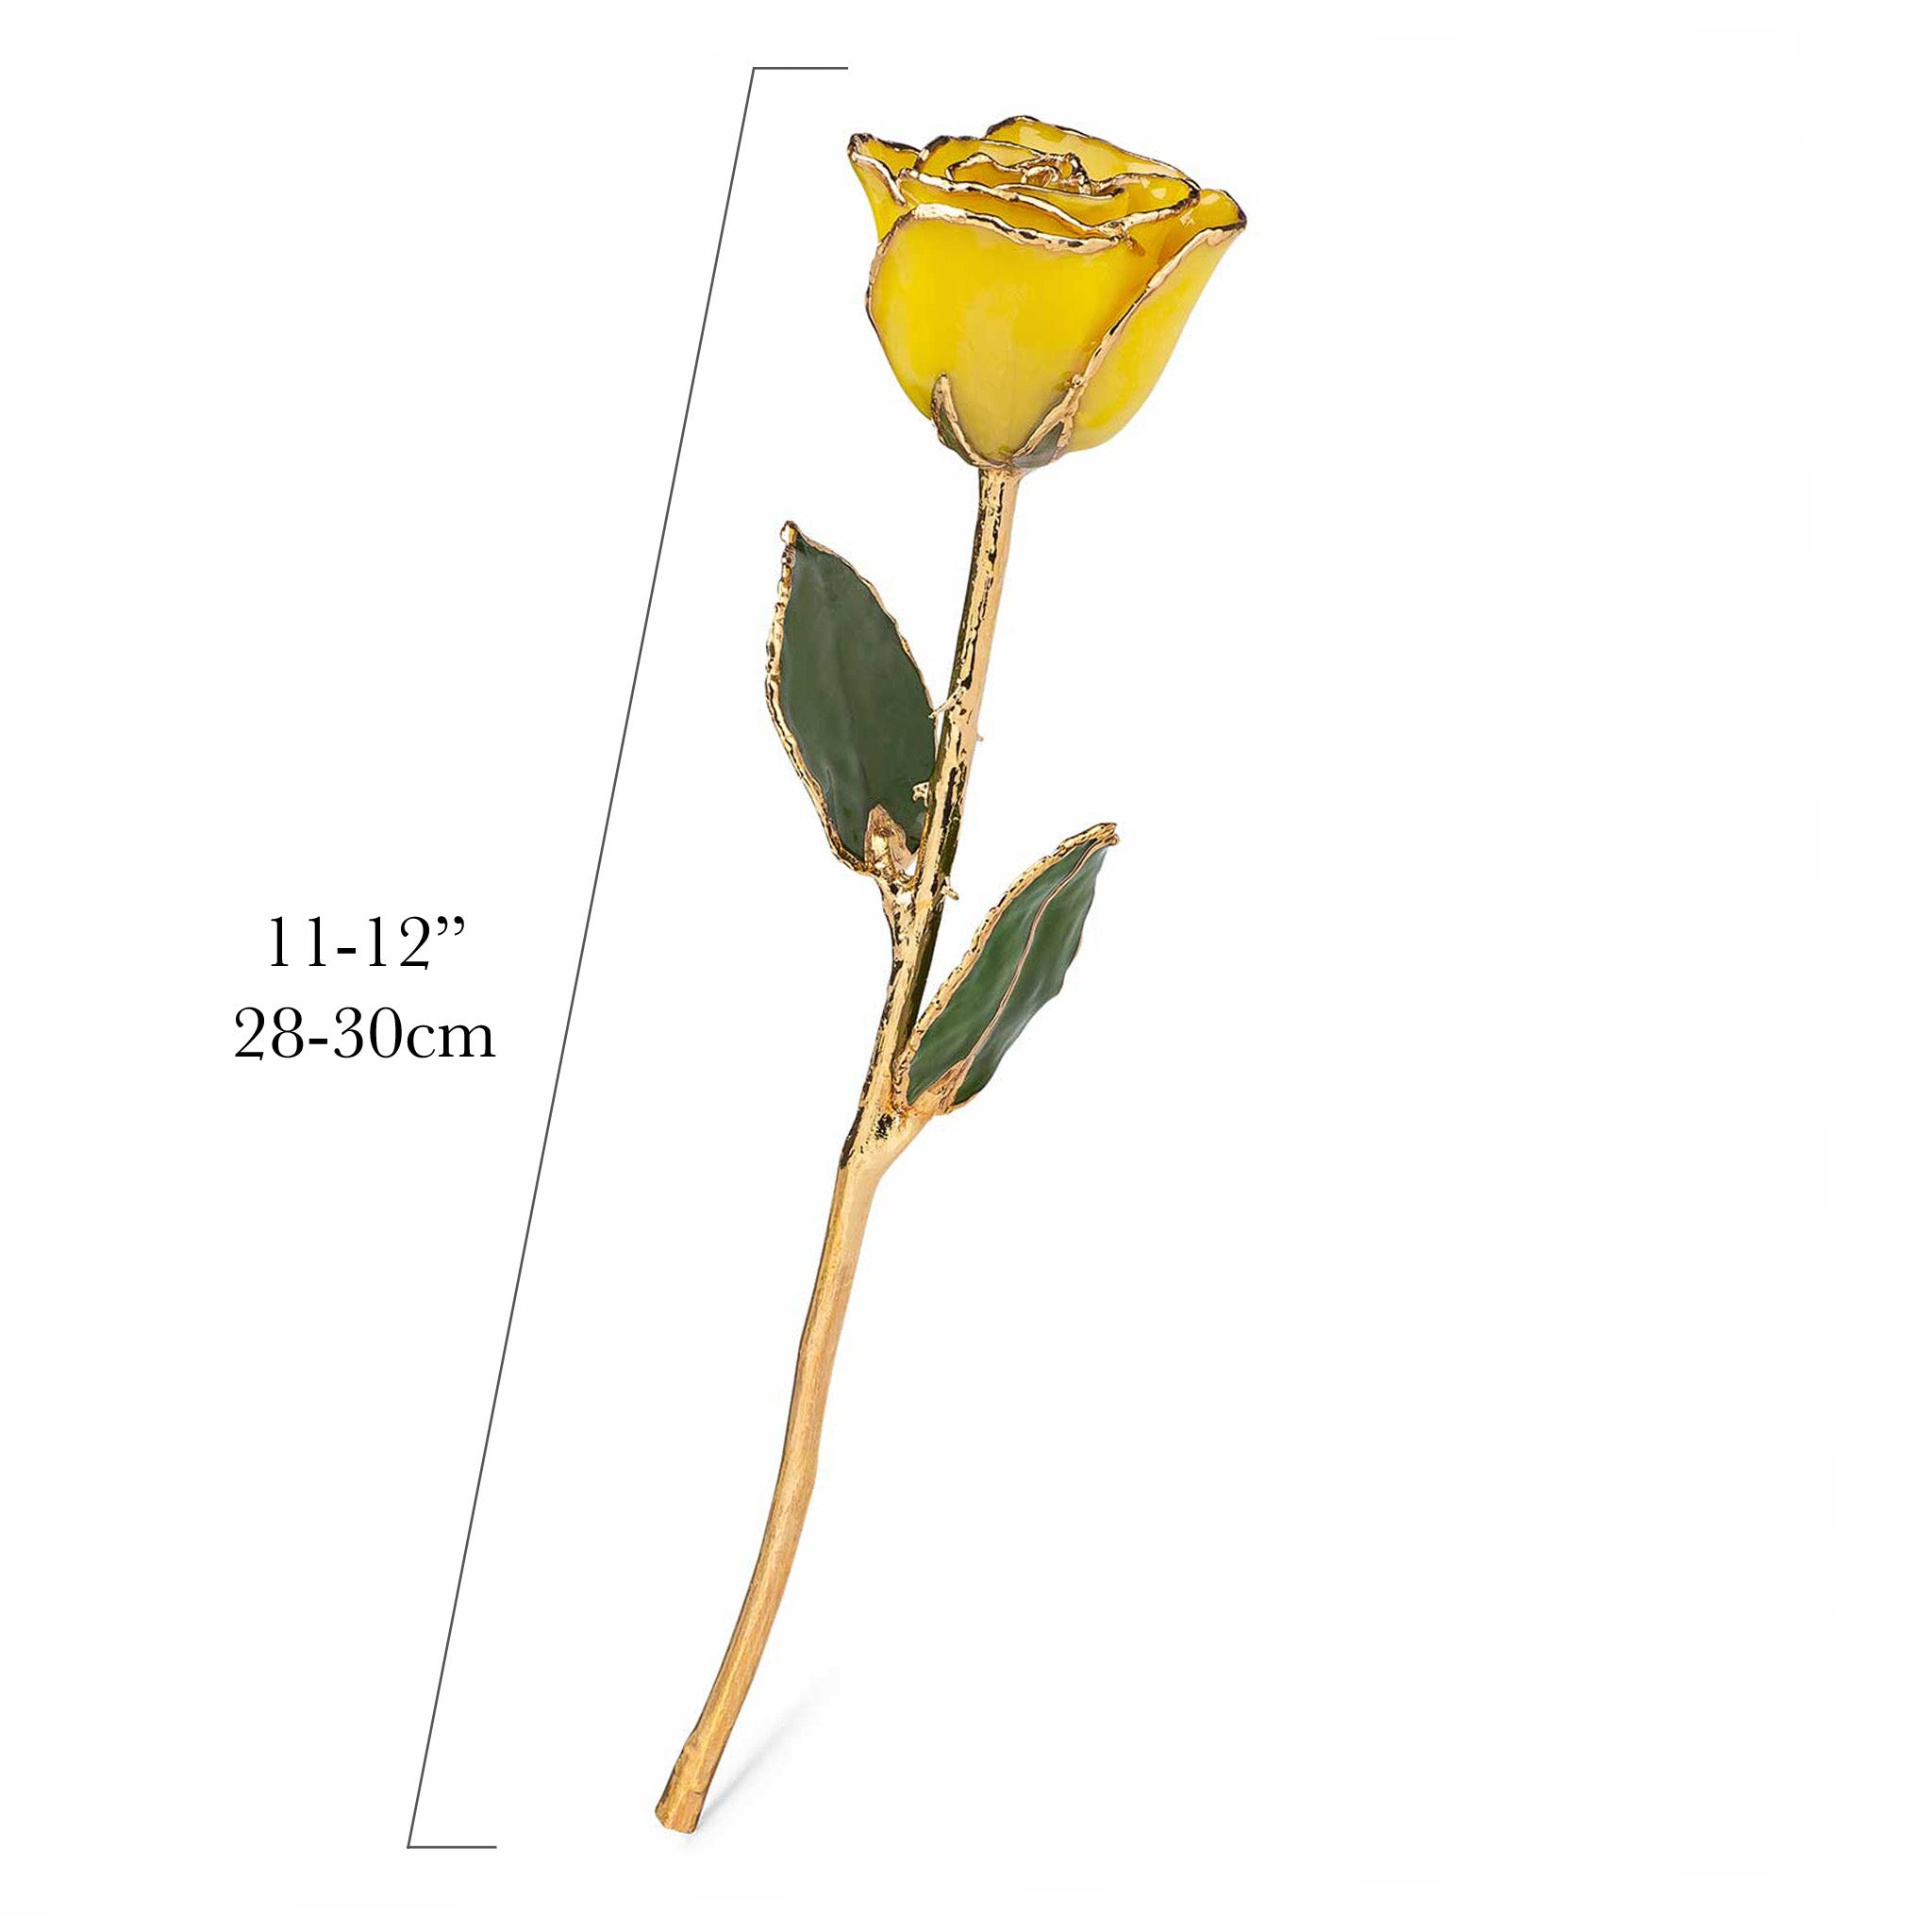 24K Gold Trimmed Forever Rose with Yellow Petals. View of Stem, Leaves, and Rose Petals and Showing Detail of Gold Trim. Measurements of rose shown.